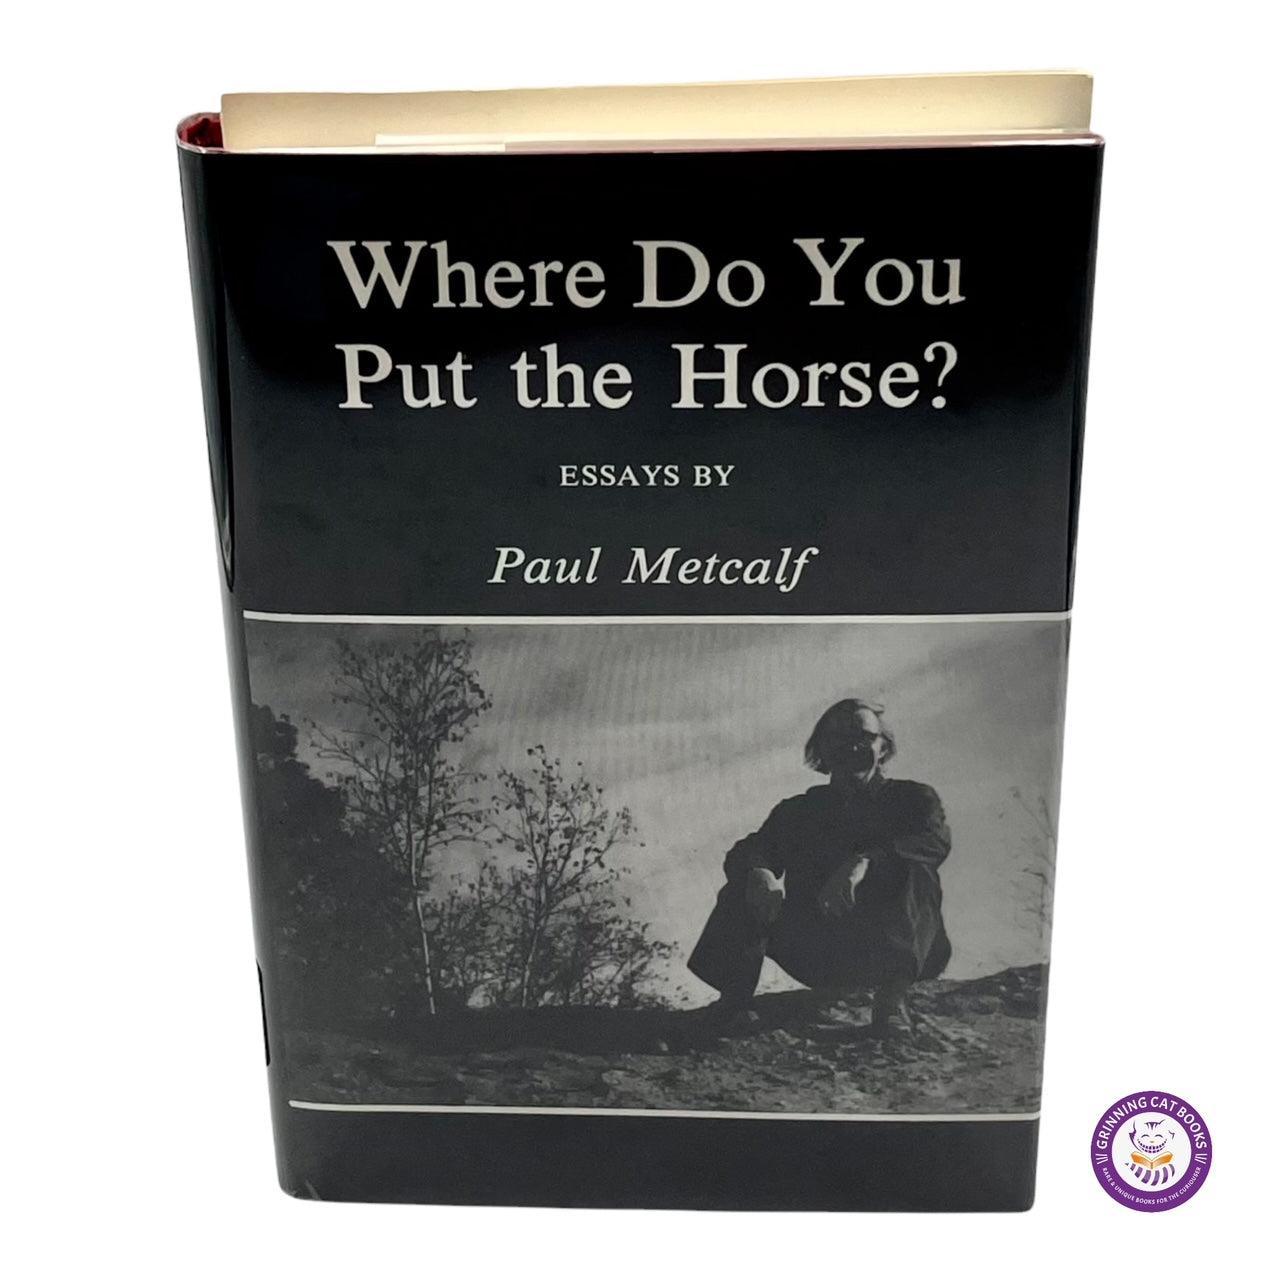 Where Do You Put the Horse? Essays (signed by Paul Metcalf) - Grinning Cat Books - AMERICAN LITERATURE - SIGNED